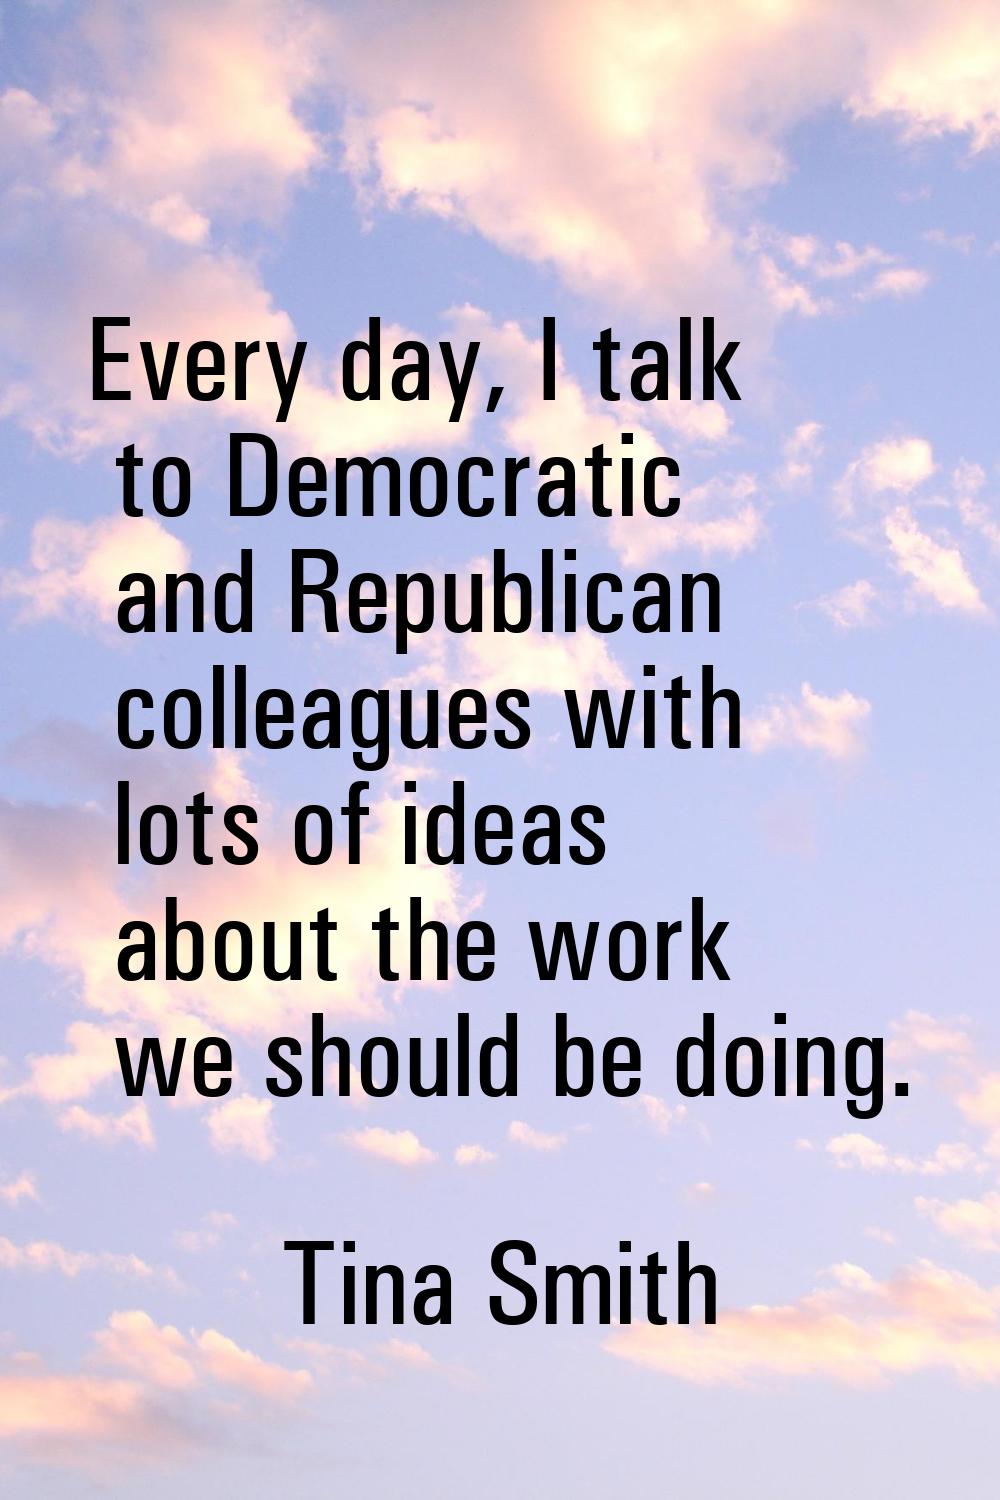 Every day, I talk to Democratic and Republican colleagues with lots of ideas about the work we shou